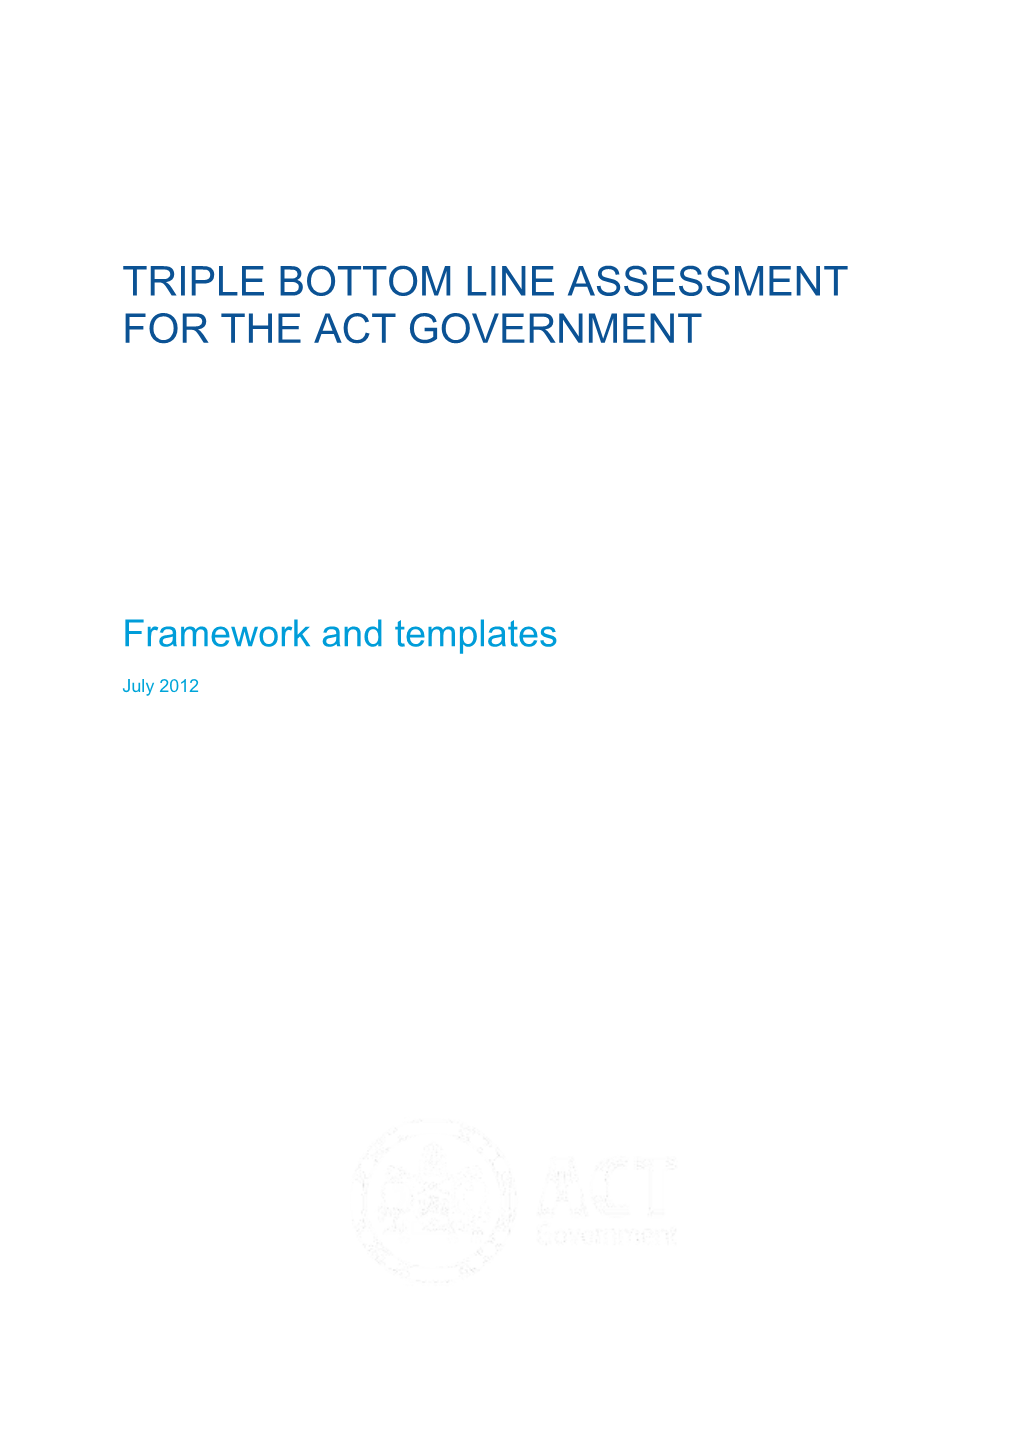 Triple Bottom Line Assessment for the ACT Government-Discussion Paper